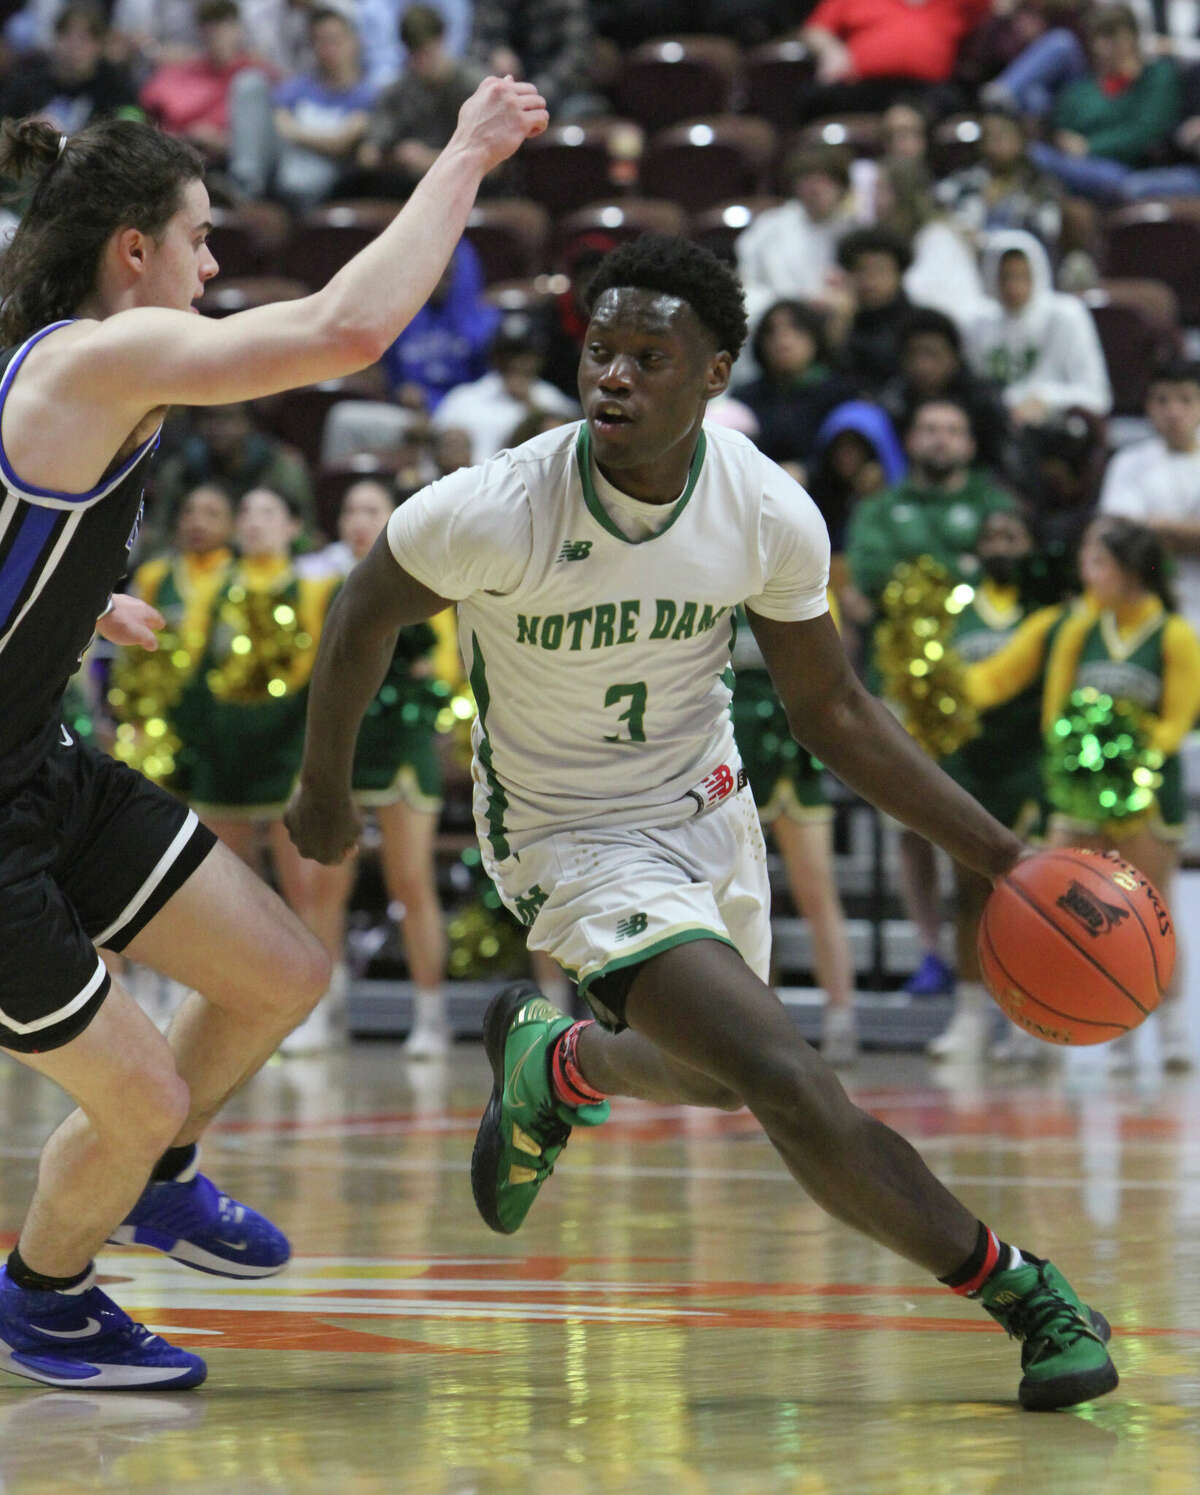 Notre Dame-West Haven's Mekhi Conner drives against East Catholic during the CIAC 2022 State Boys Basketball Tournament Division I Finals at the Mohegan Sun Arena on March 20, 2022 in Uncasville, Connecticut. East Catholic won 50-49.